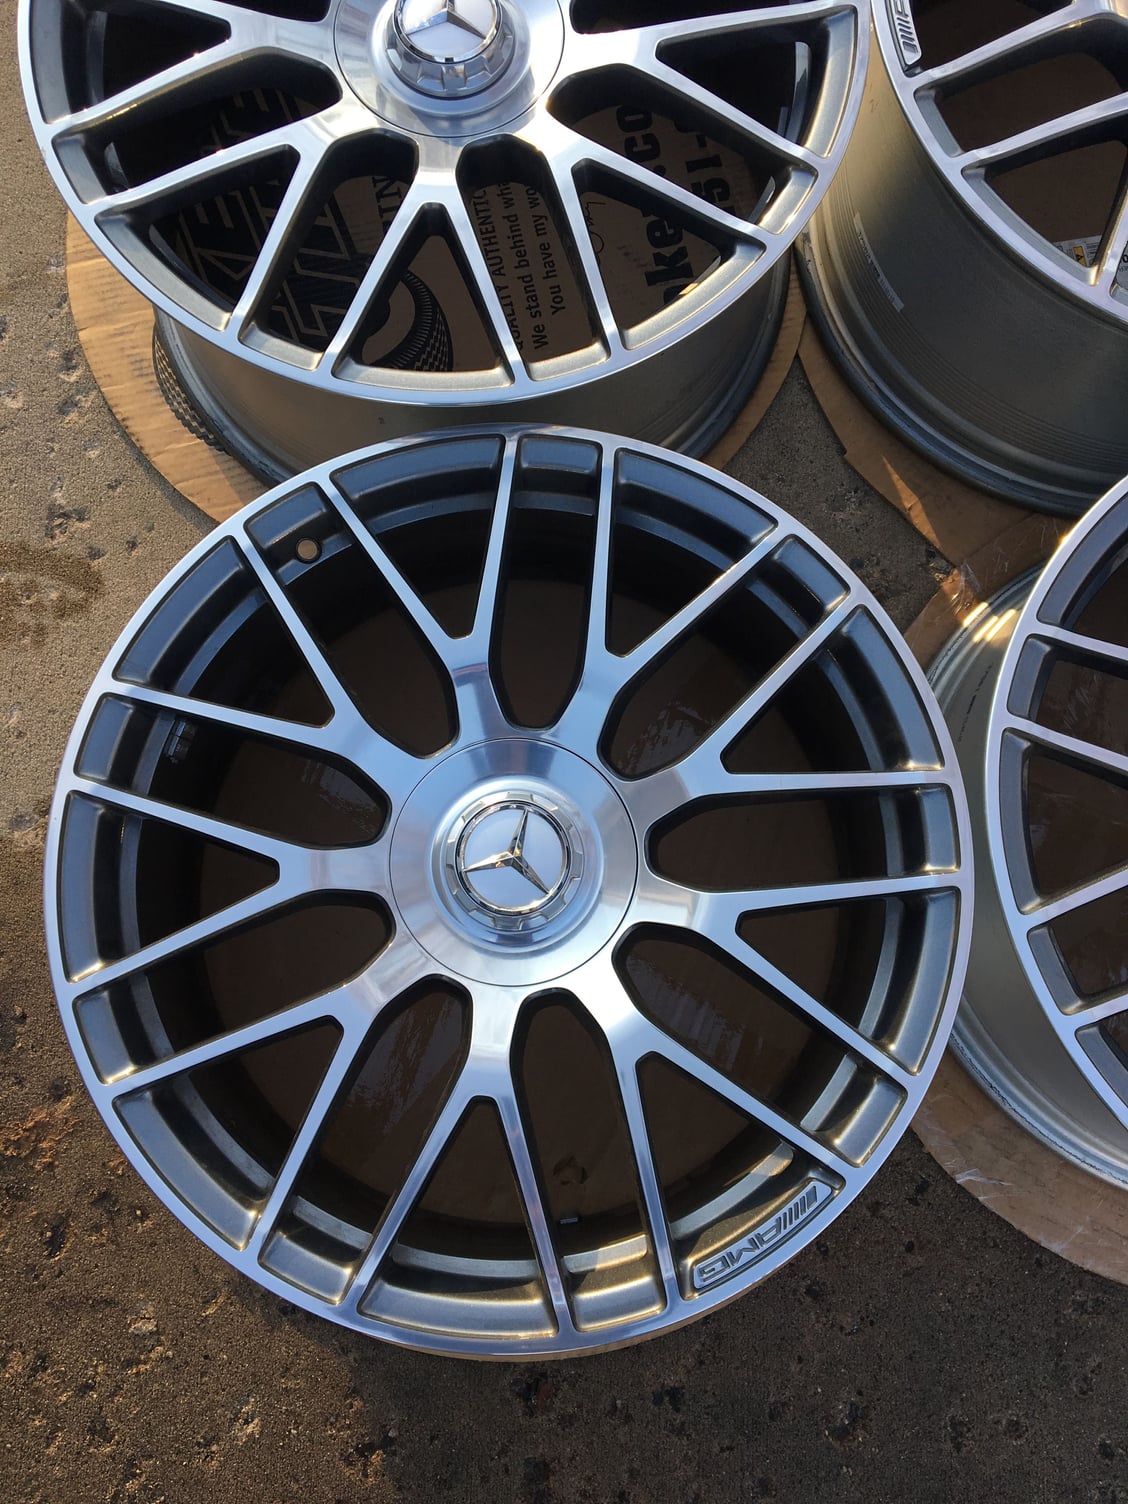 Wheels and Tires/Axles - 19" OEM Mercedes C63 AMG Wheels - EXCELLENT - C63 AMG - W205 C Class - Used - 2008 to 2017 Mercedes-Benz C63 AMG - 2008 to 2017 Mercedes-Benz C63 AMG S - Minneapolis, MN 55447, United States